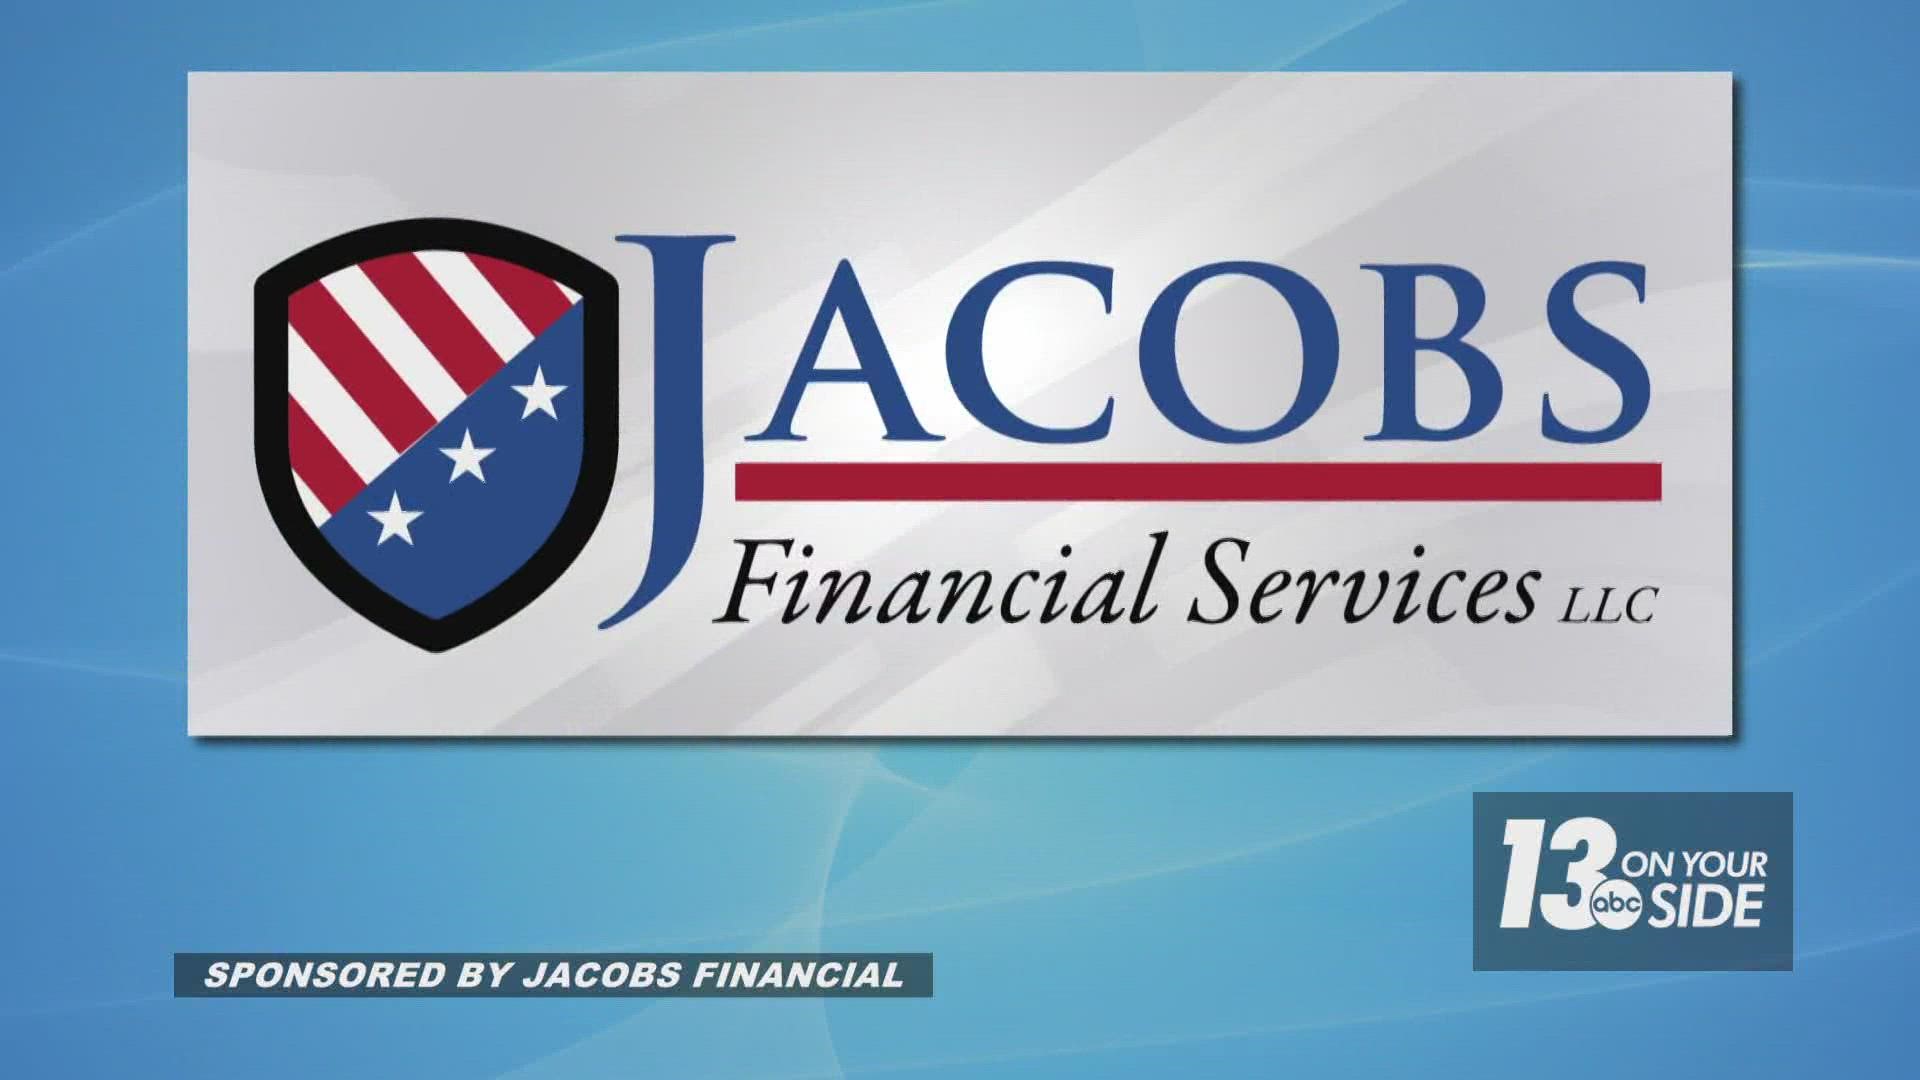 Now is the time to sit down with Tom Jacobs from Jacobs Financial Services to talk about putting the right plan in place.